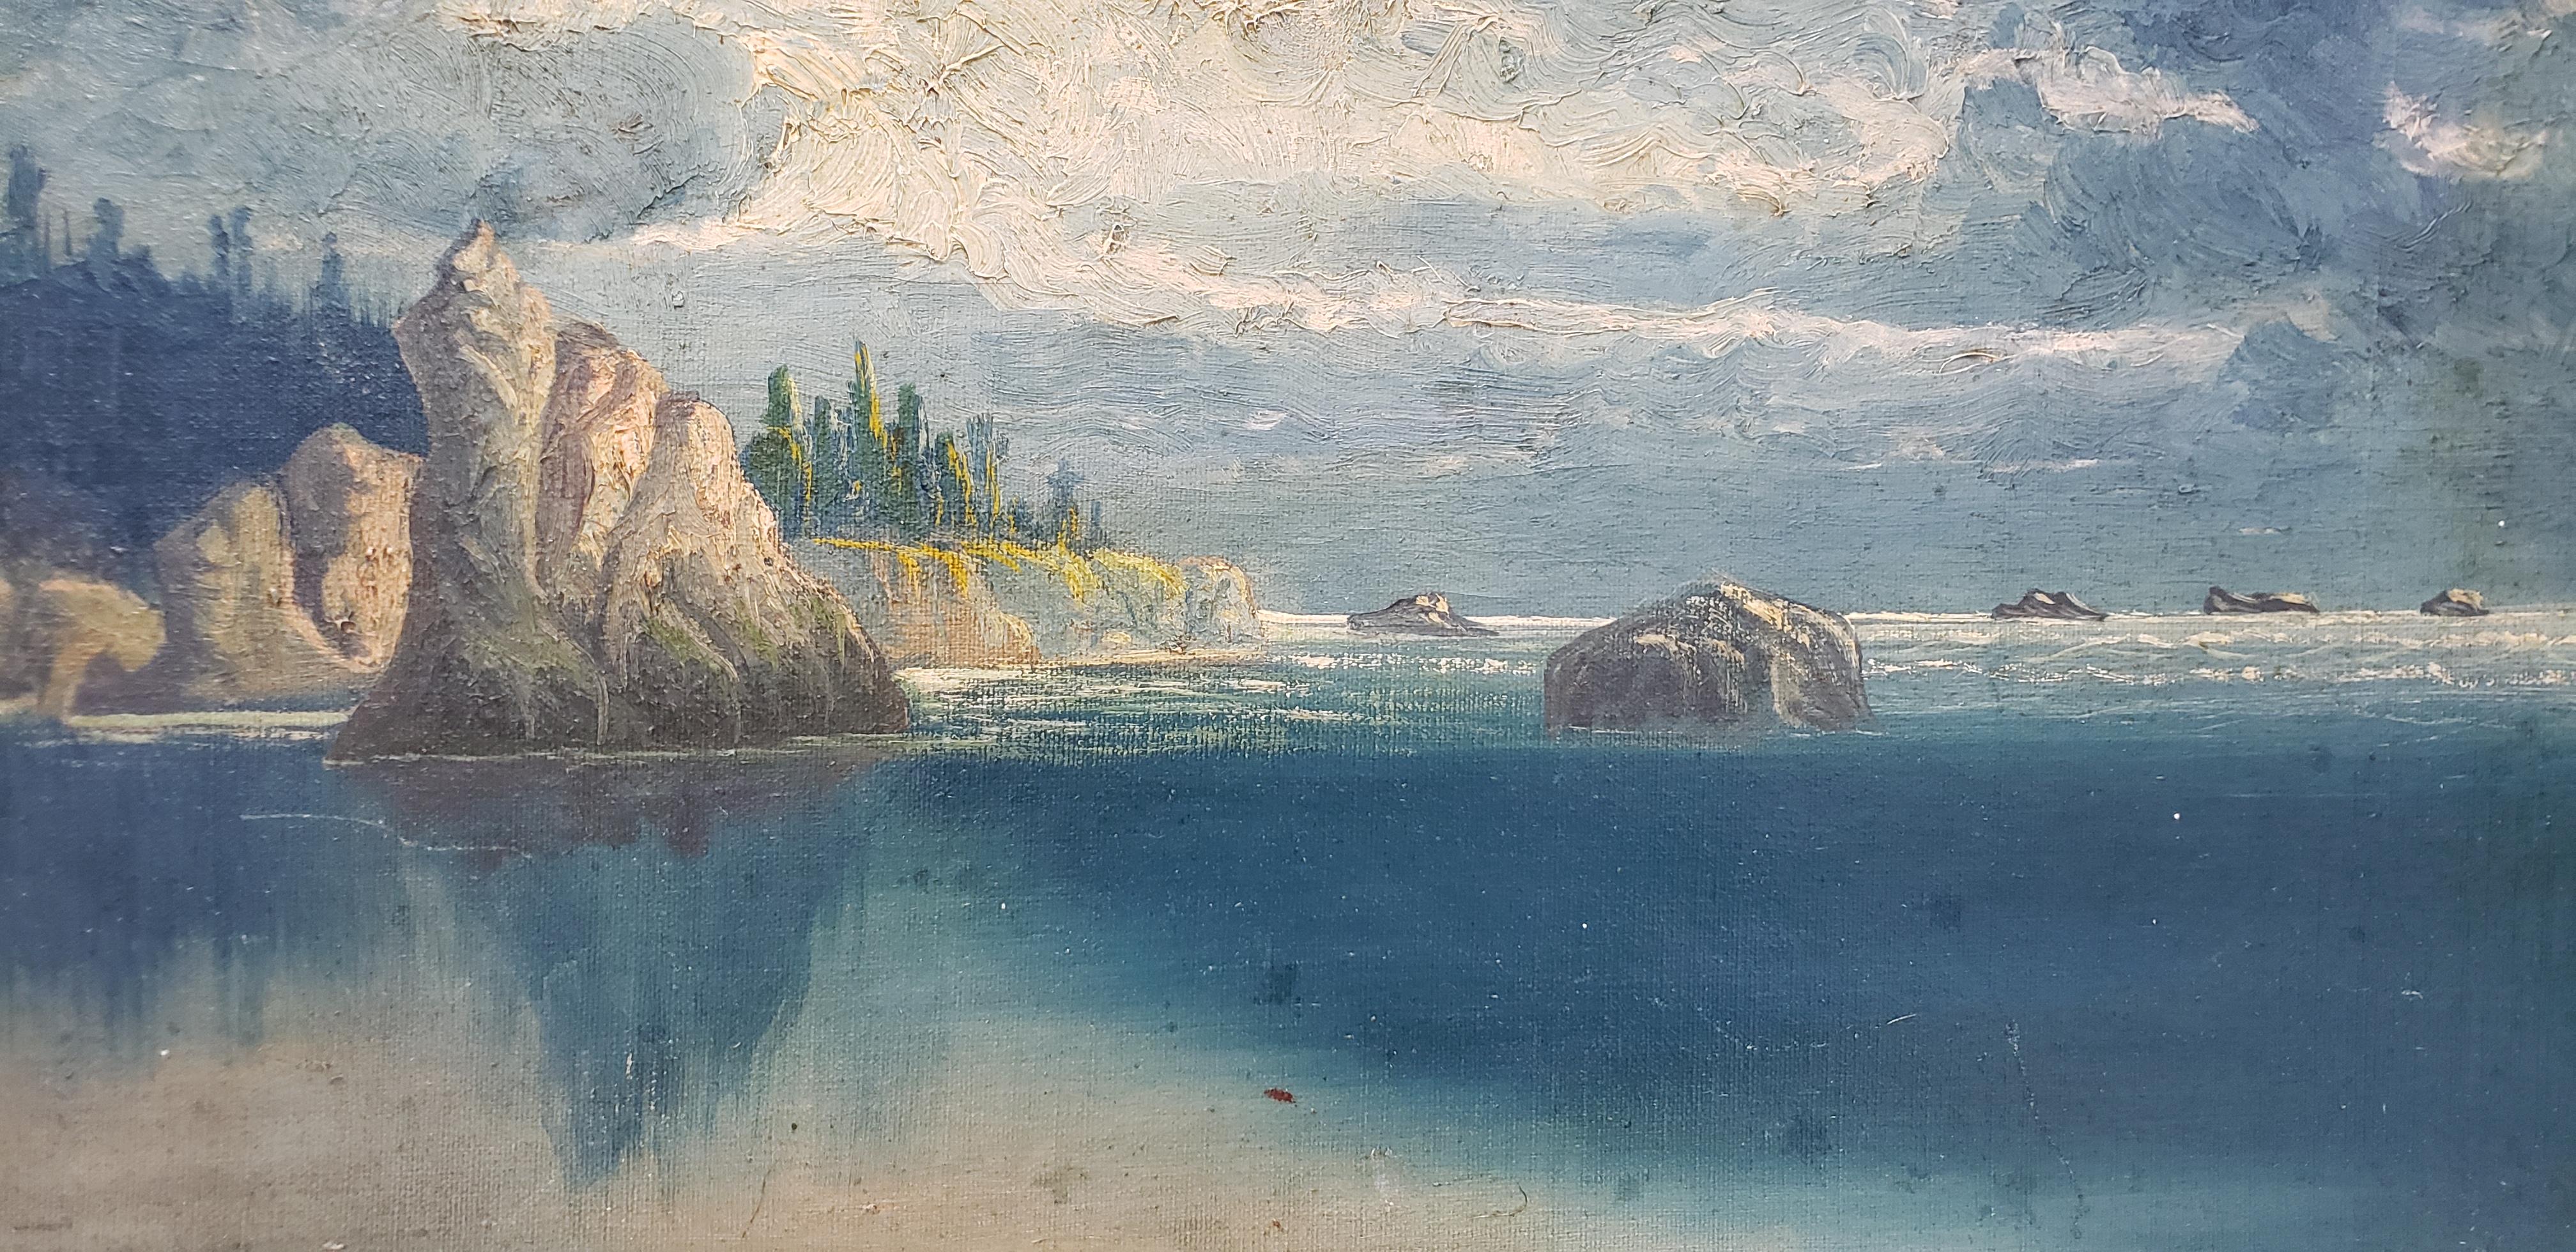 Northwest Rugged Coast Landscape Oil Painting by Chas R. Hall c.1924 For Sale 2